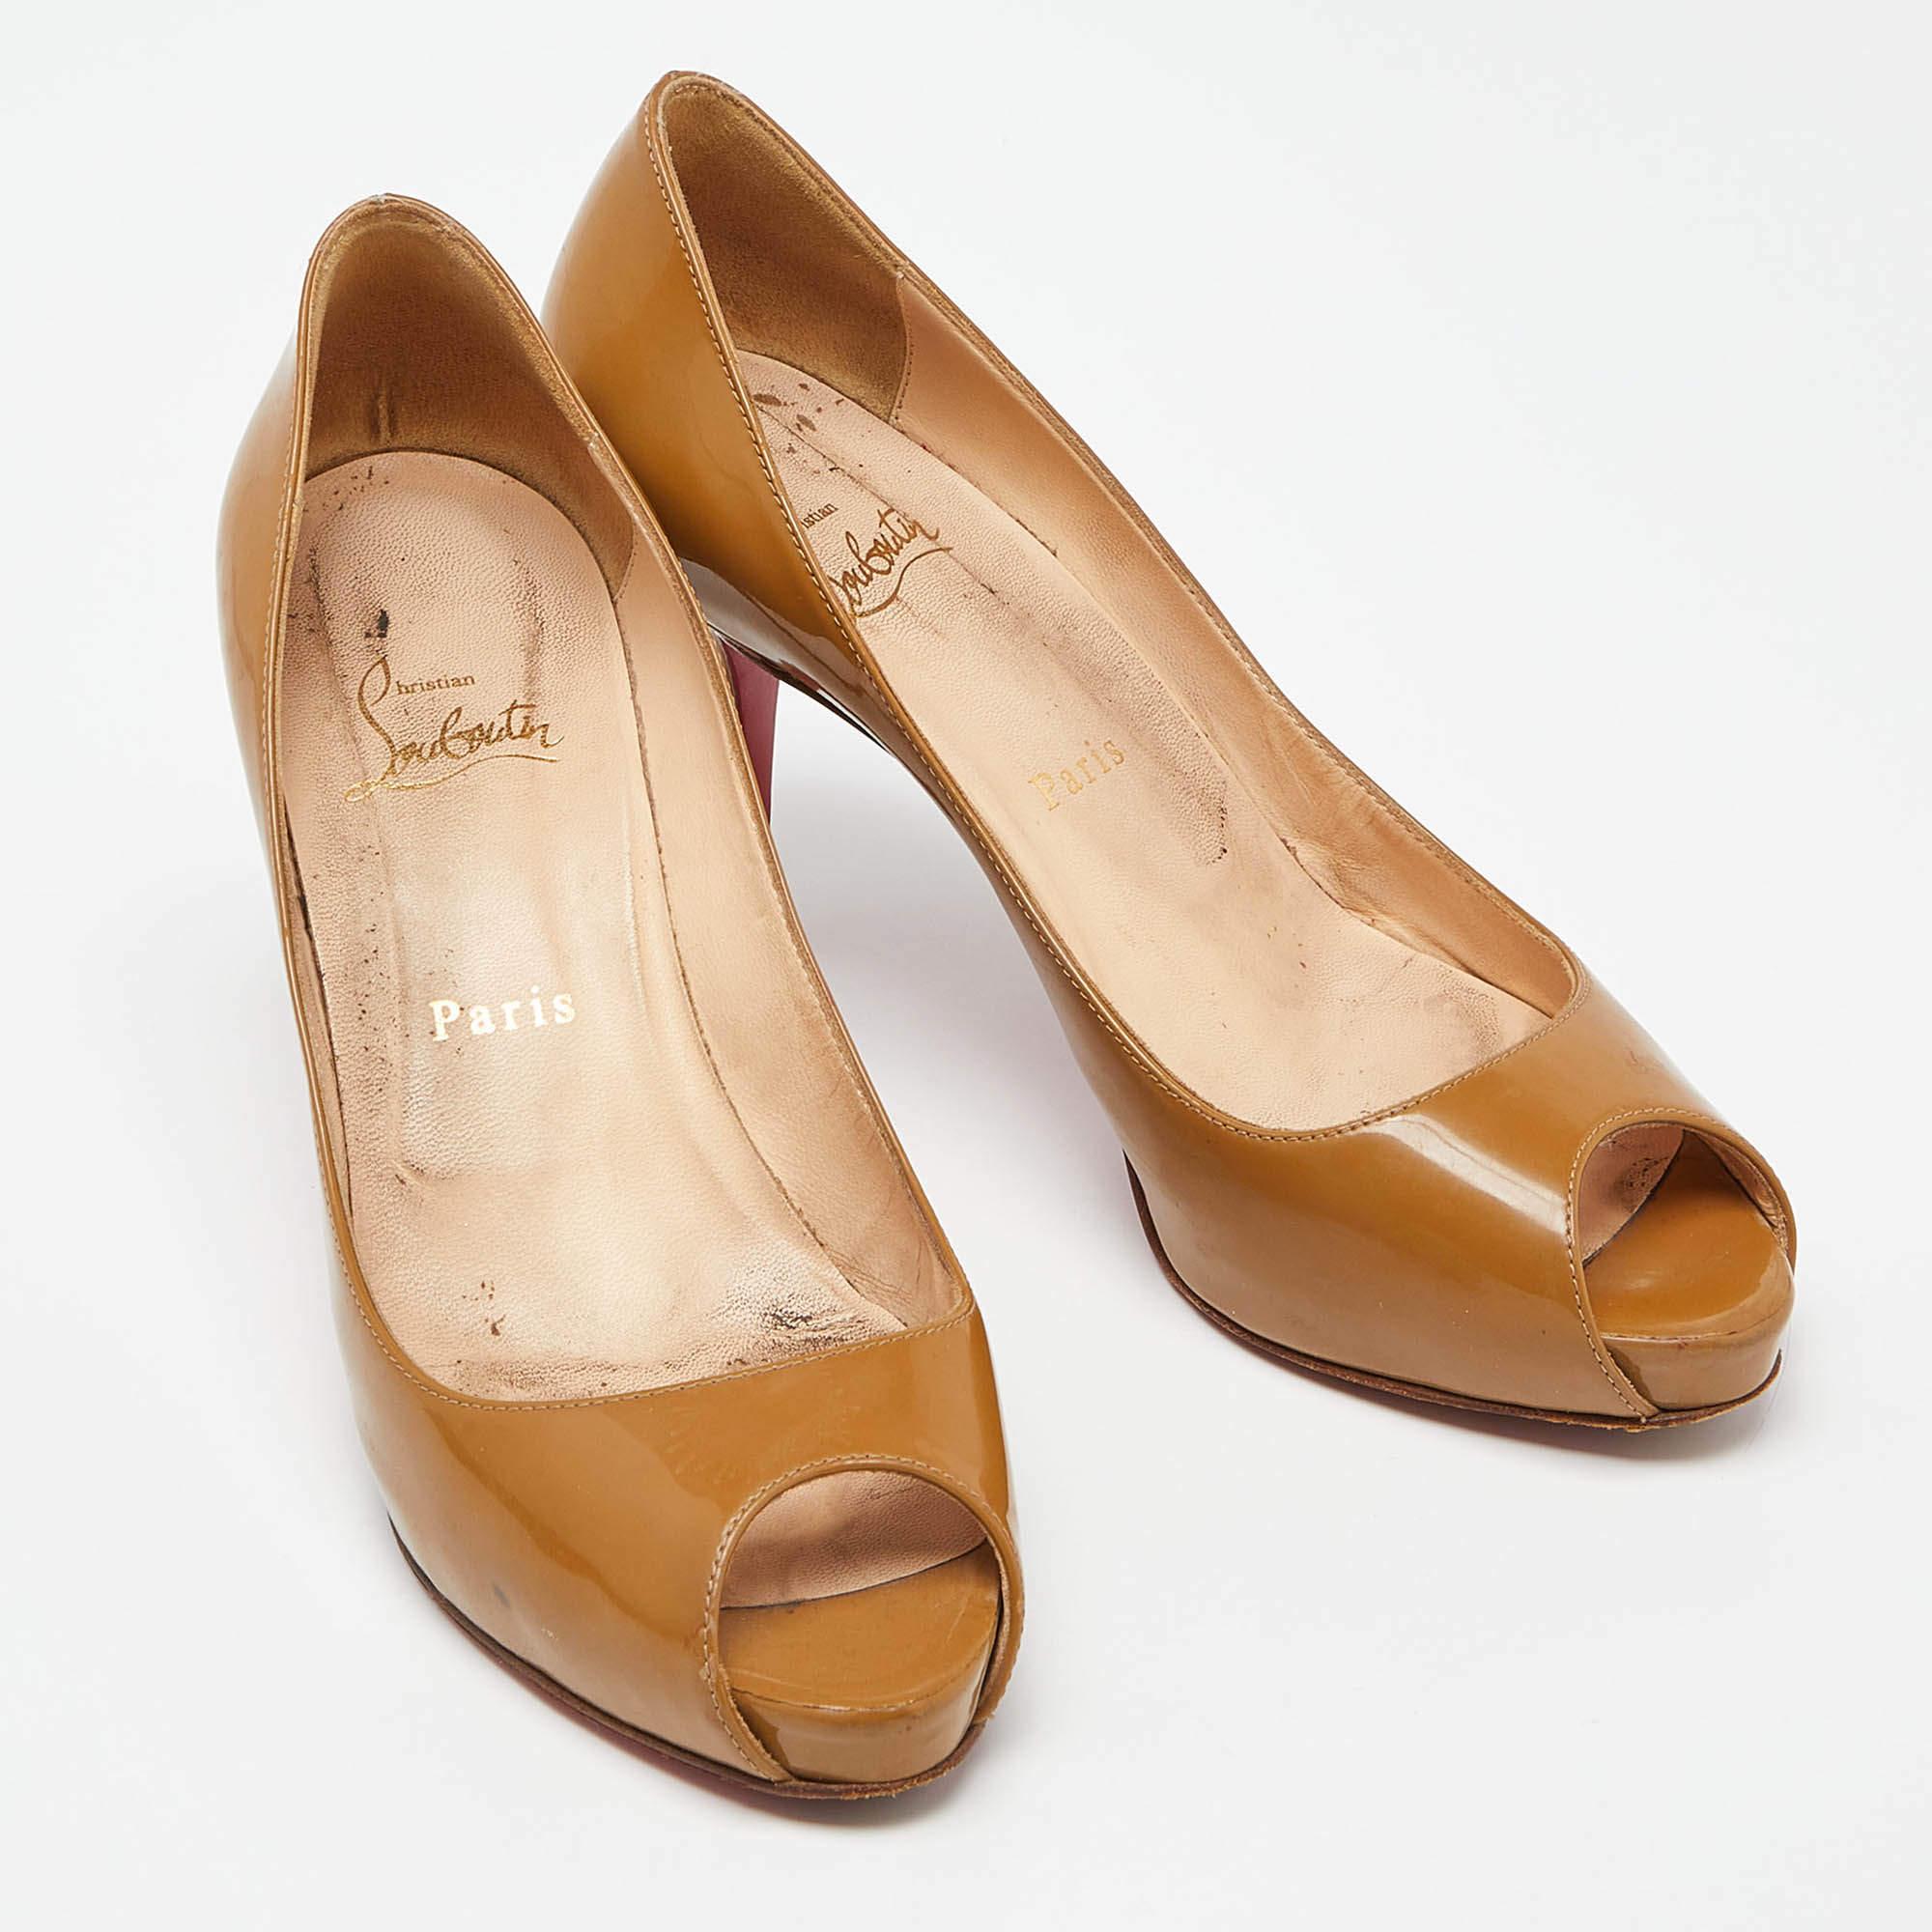 Christian Louboutin Beige Patent Leather Very Prive Pumps Size 38.5 For Sale 5